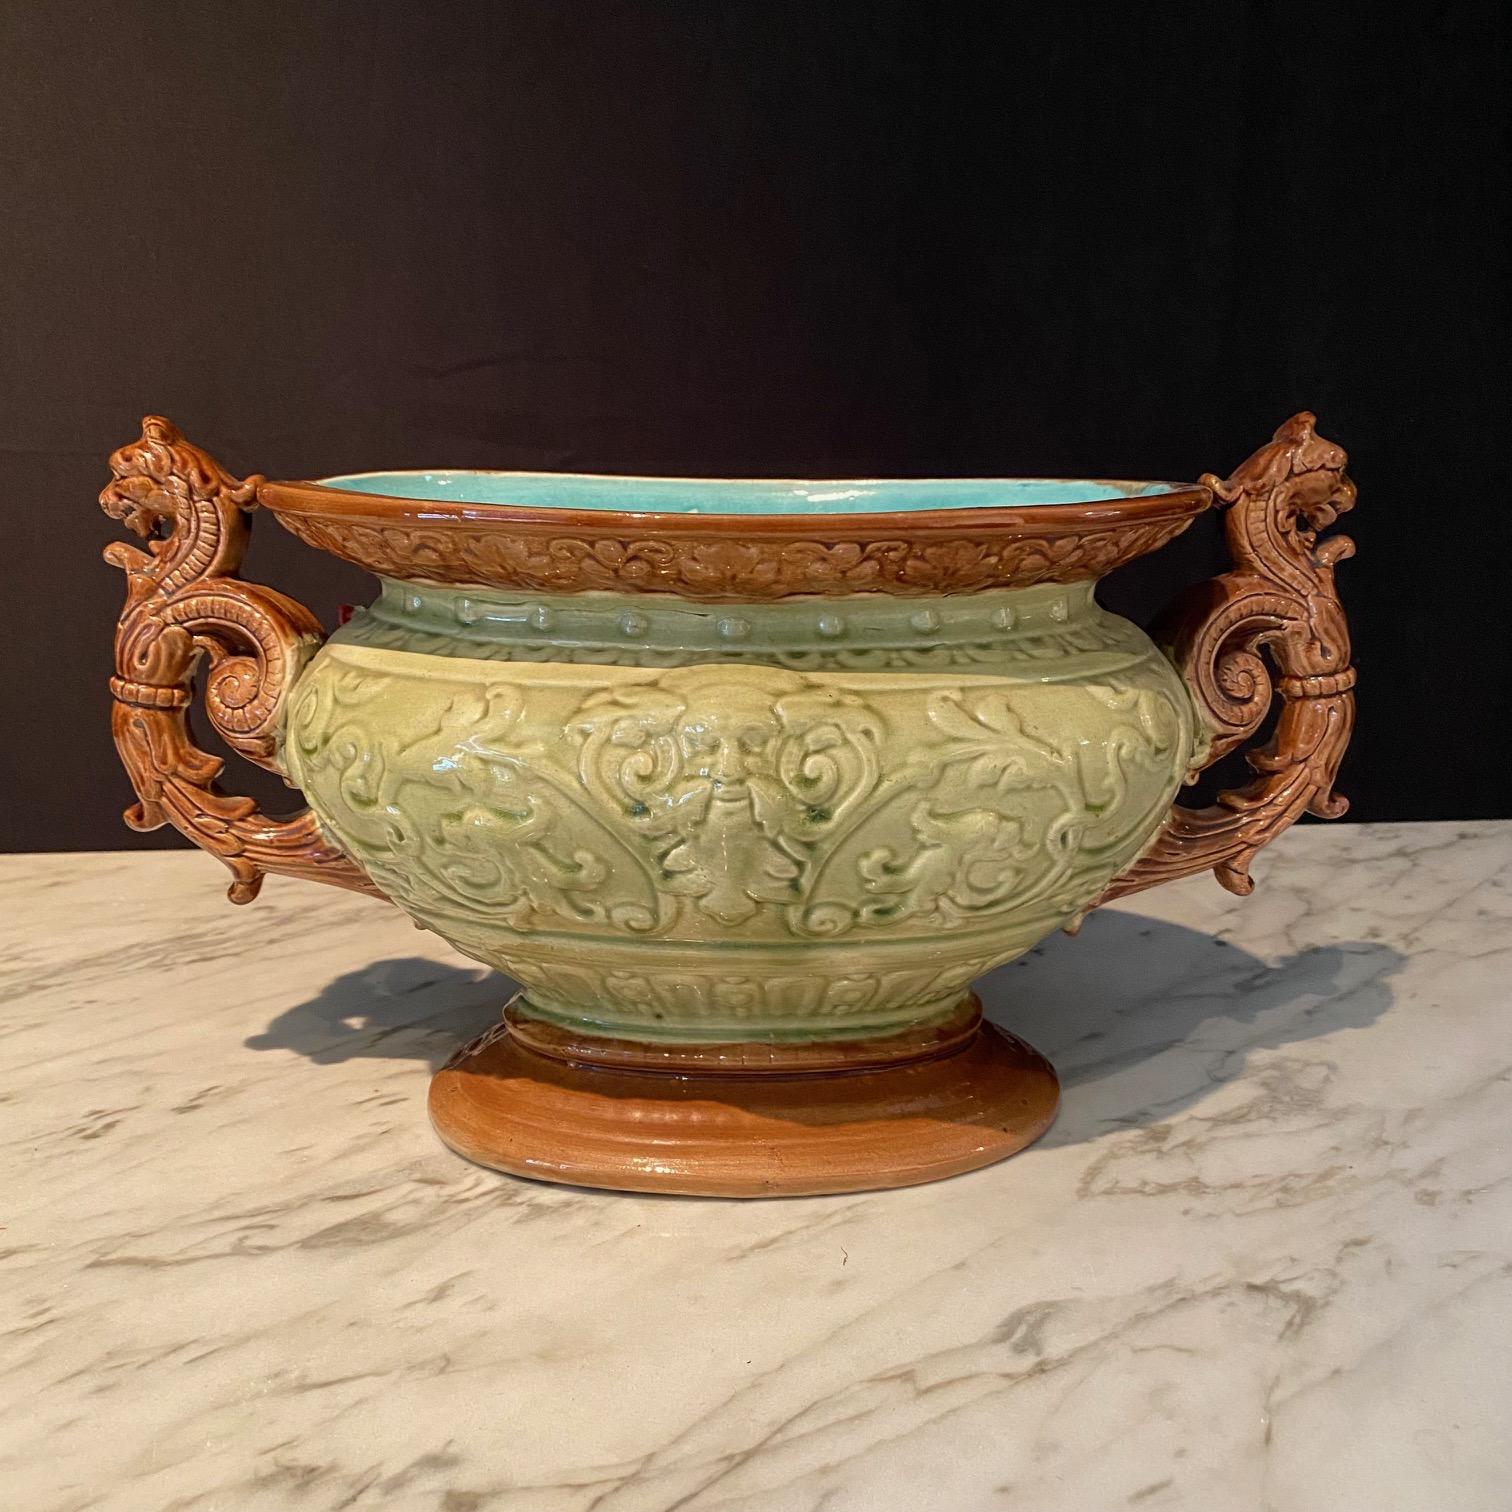 20th Century French Porcelain Barbotine Faience Majolica Jardiniere or Tureen For Sale